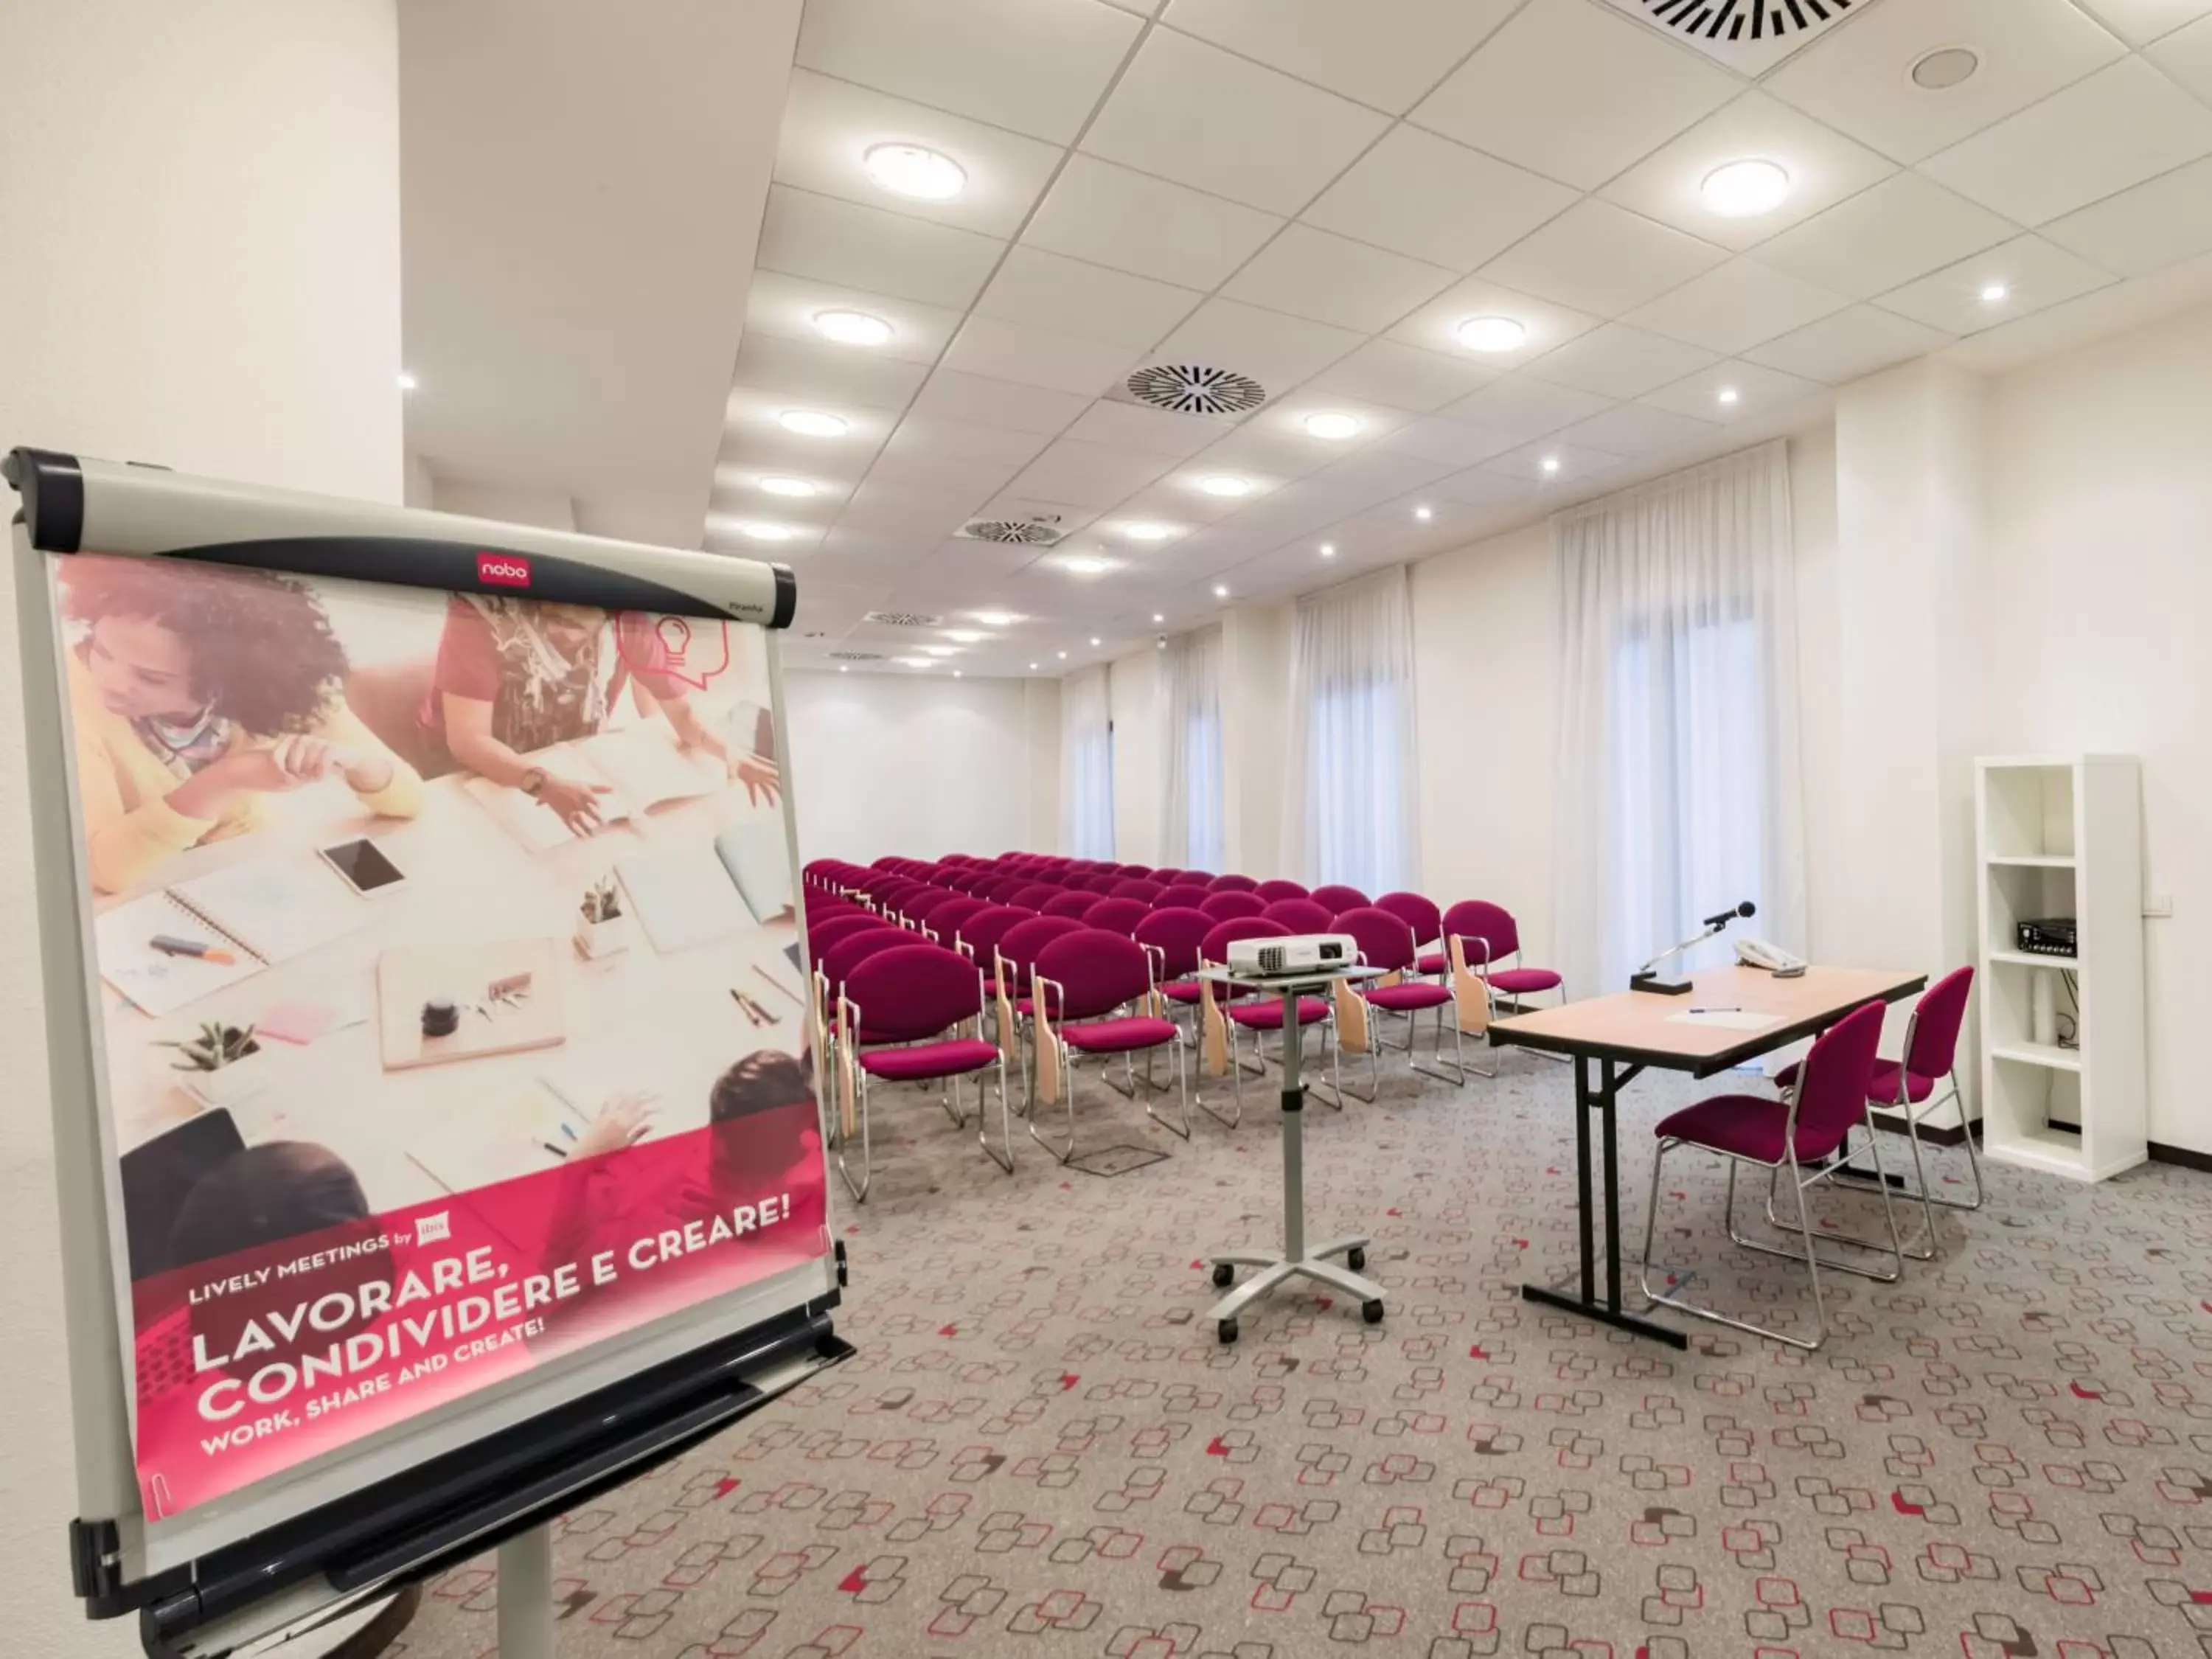 Meeting/conference room in Hotel Ibis Milano Malpensa